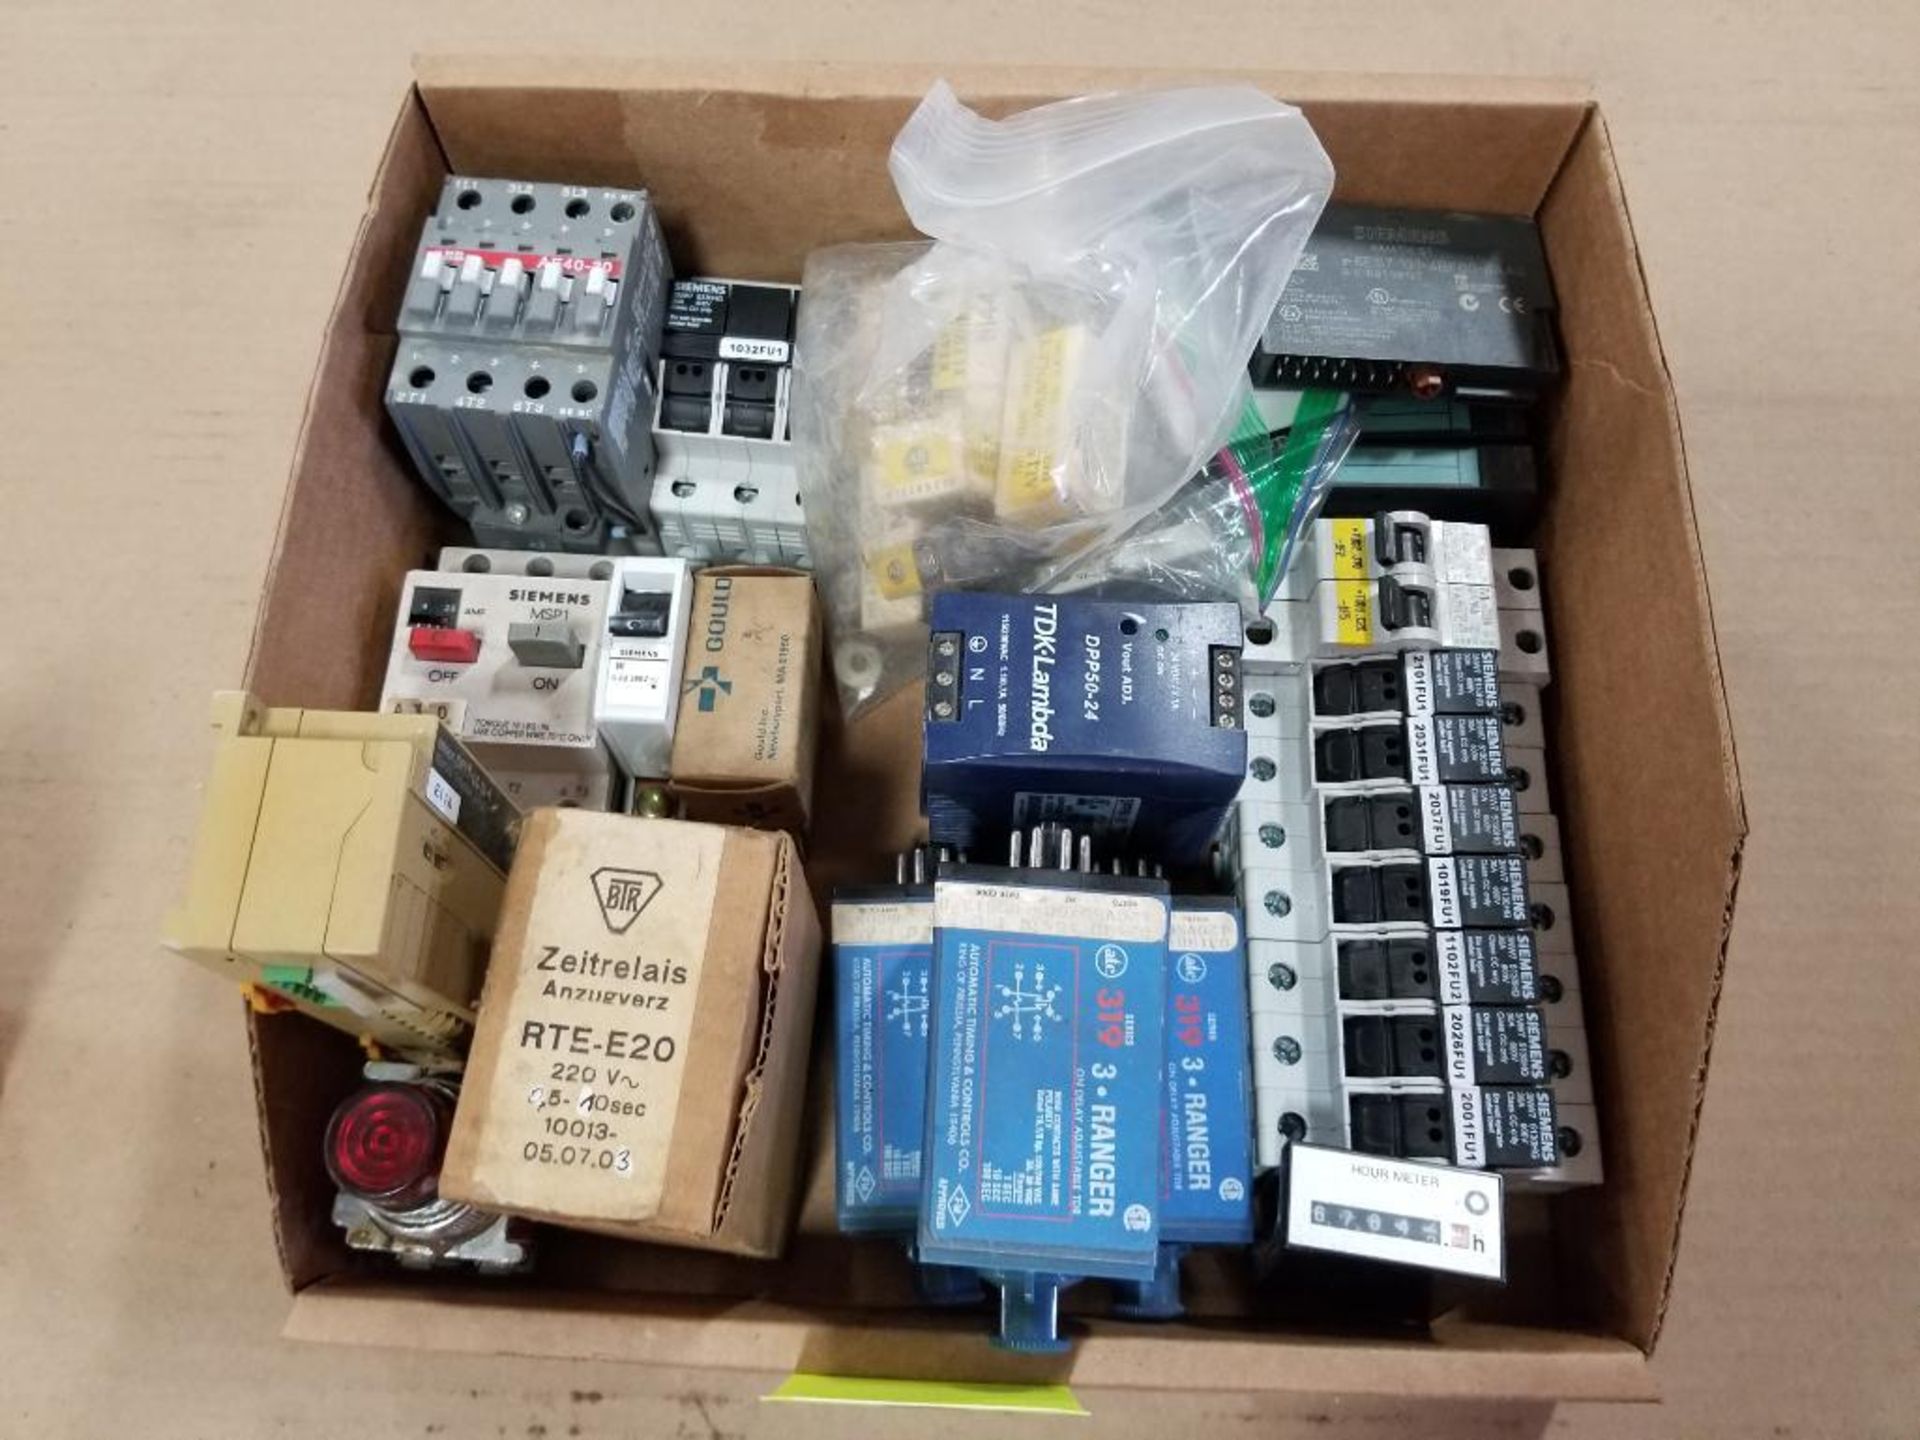 Assorted electrical contactor, breakers, relay. BTR, Siemens, ATC, ect. - Image 10 of 10